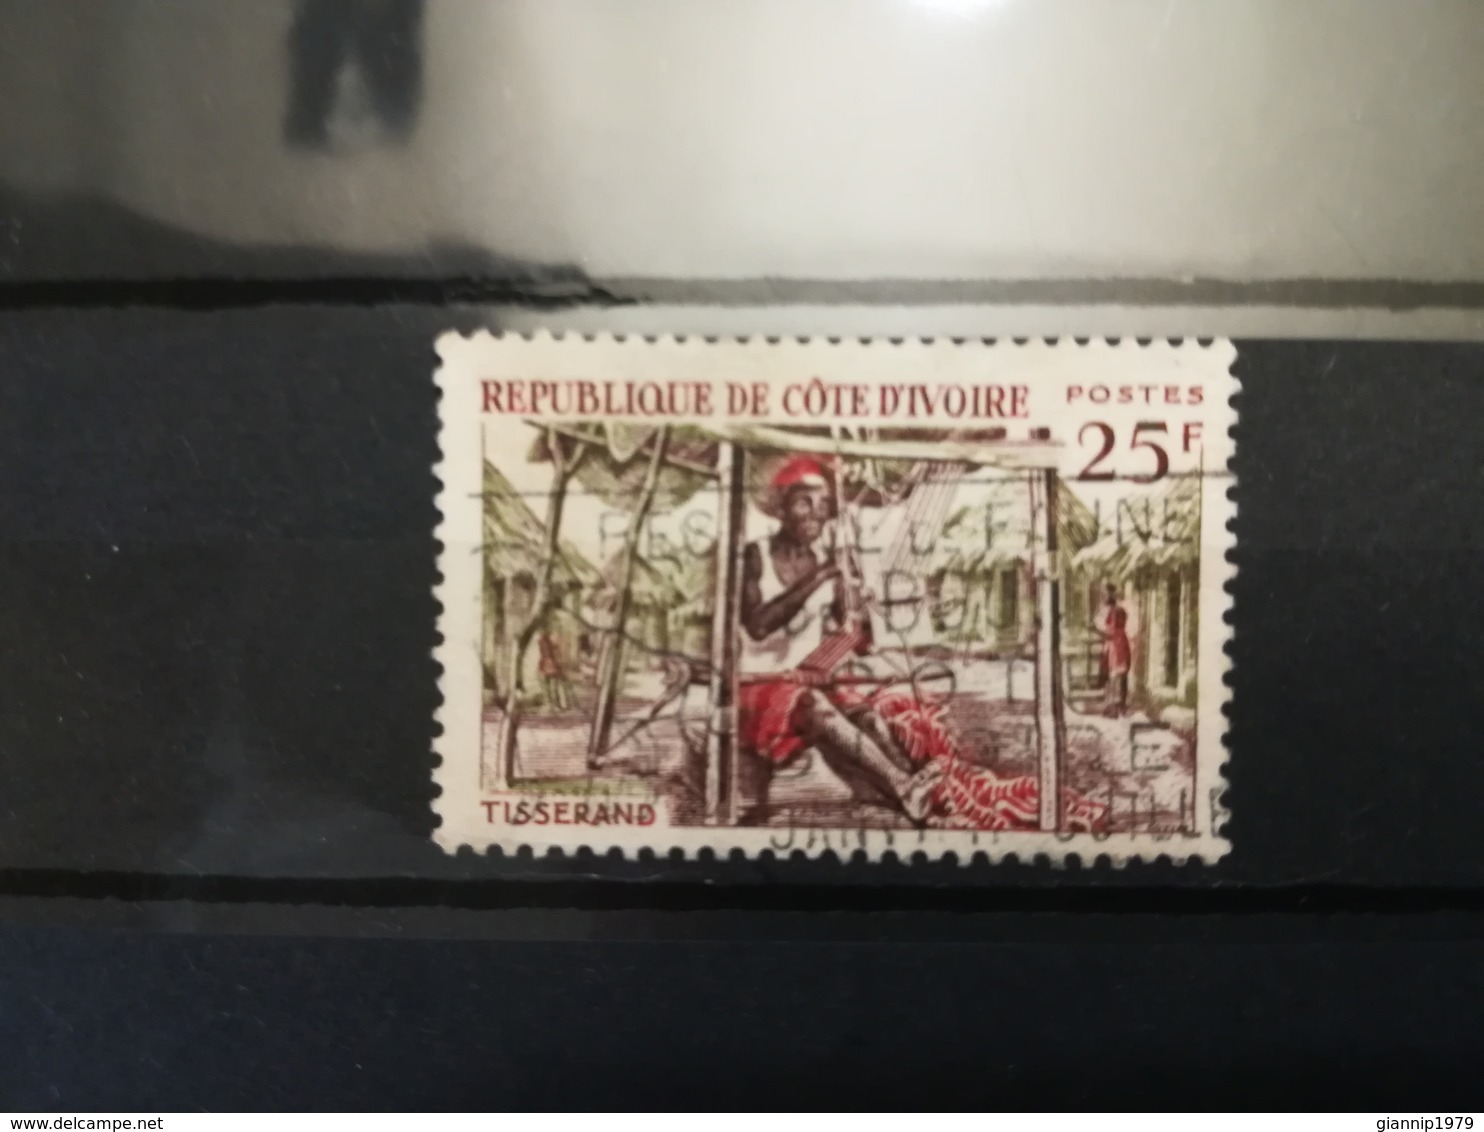 FRANCOBOLLI STAMPS COSTA D' AVORIO COTE D' IVOIRE 1965 USED NATIVE - Ivory Coast (1960-...)